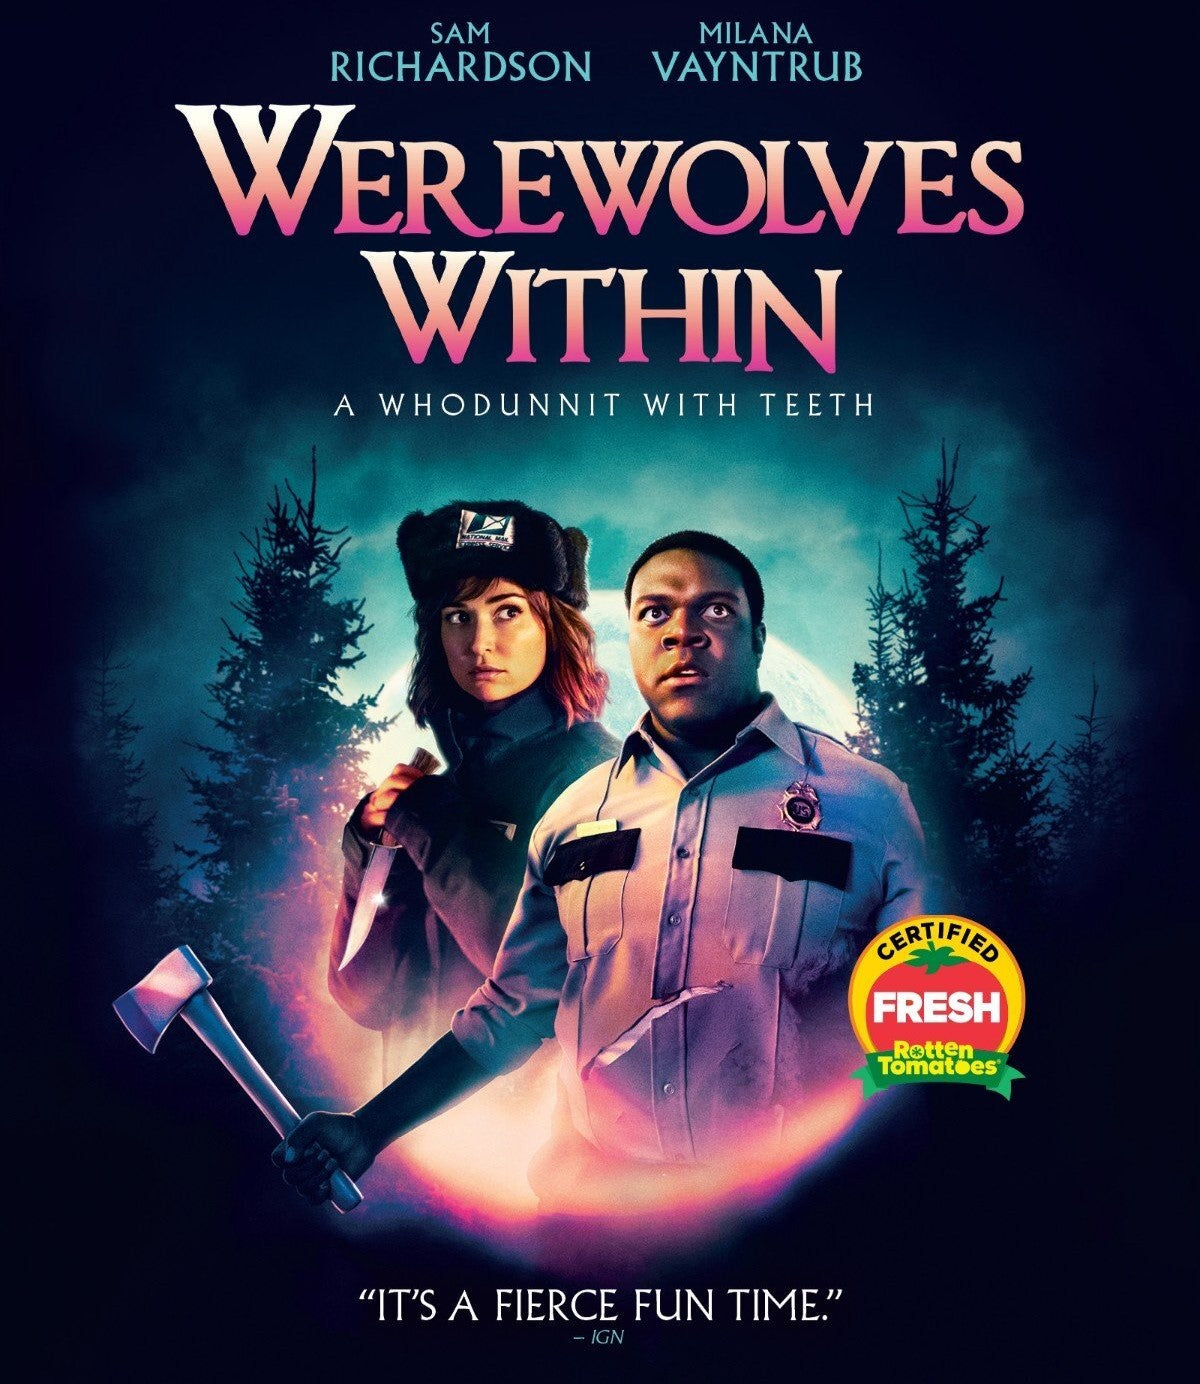 WEREWOLVES WITHIN BLU-RAY